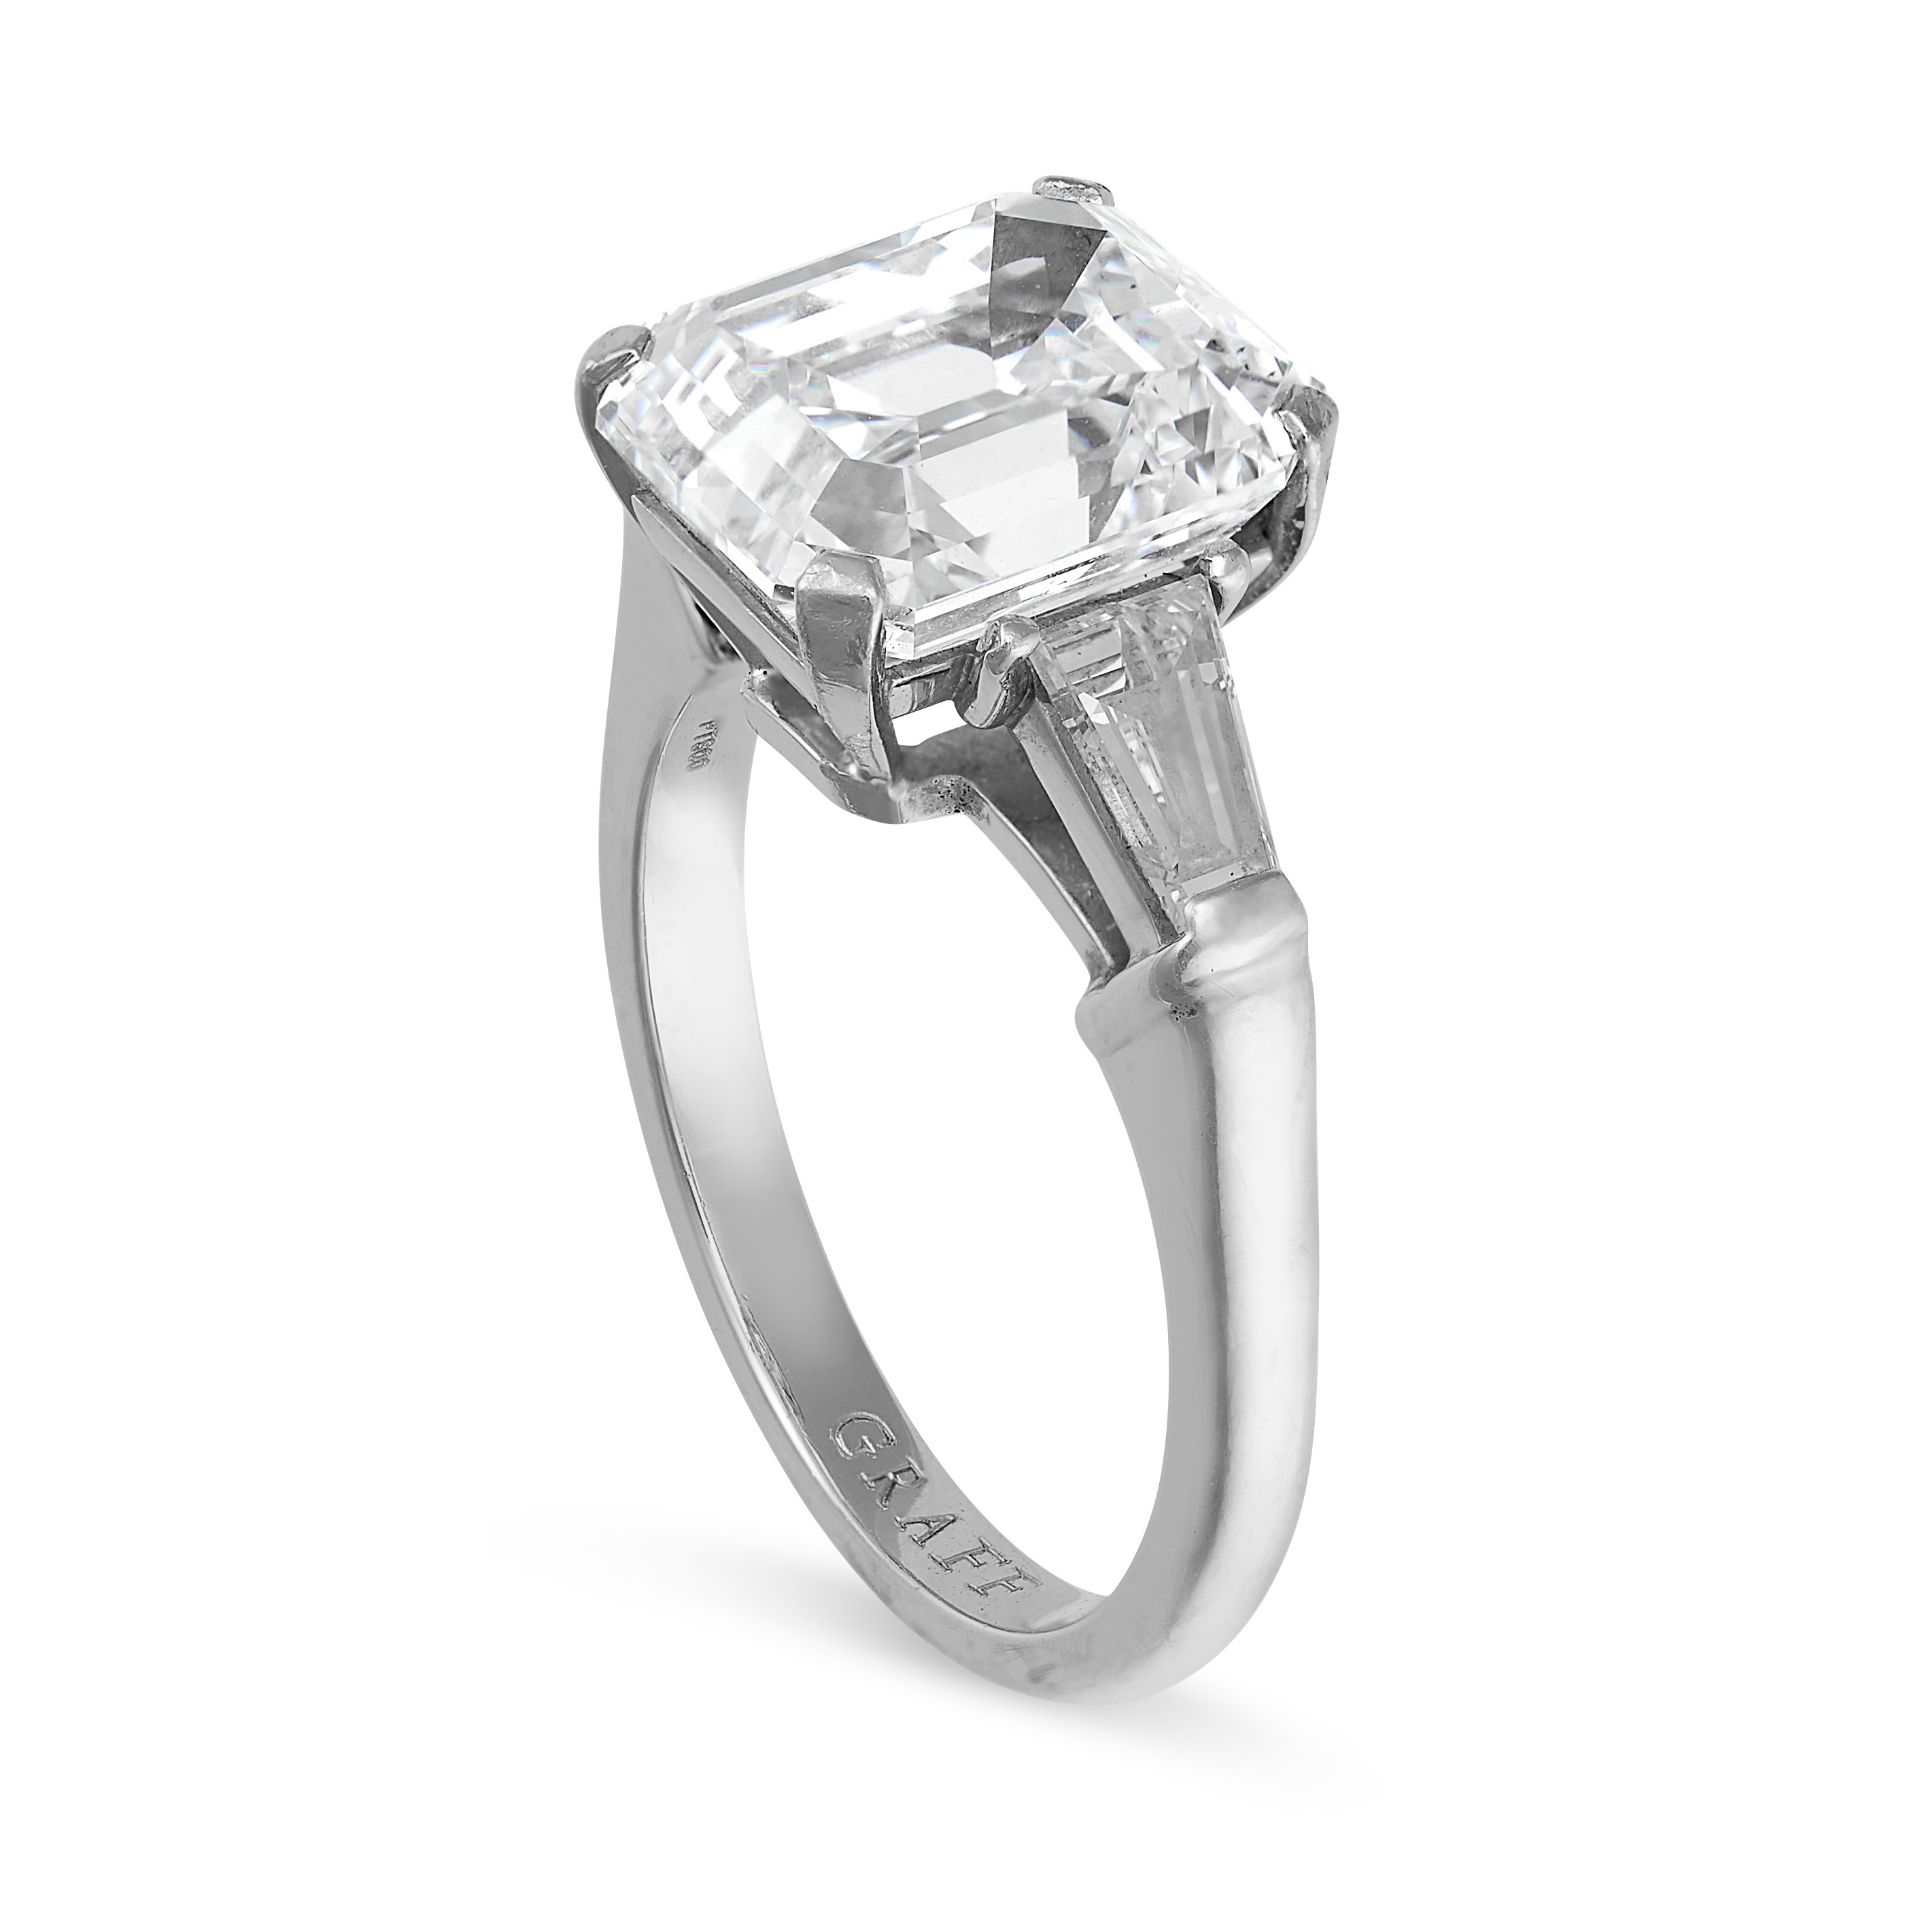 GRAFF, AN IMPORTANT 5.05 CARAT G COLOUR, VS1 SOLITAIRE DIAMOND RING in platinum, set with an emerald - Image 2 of 2